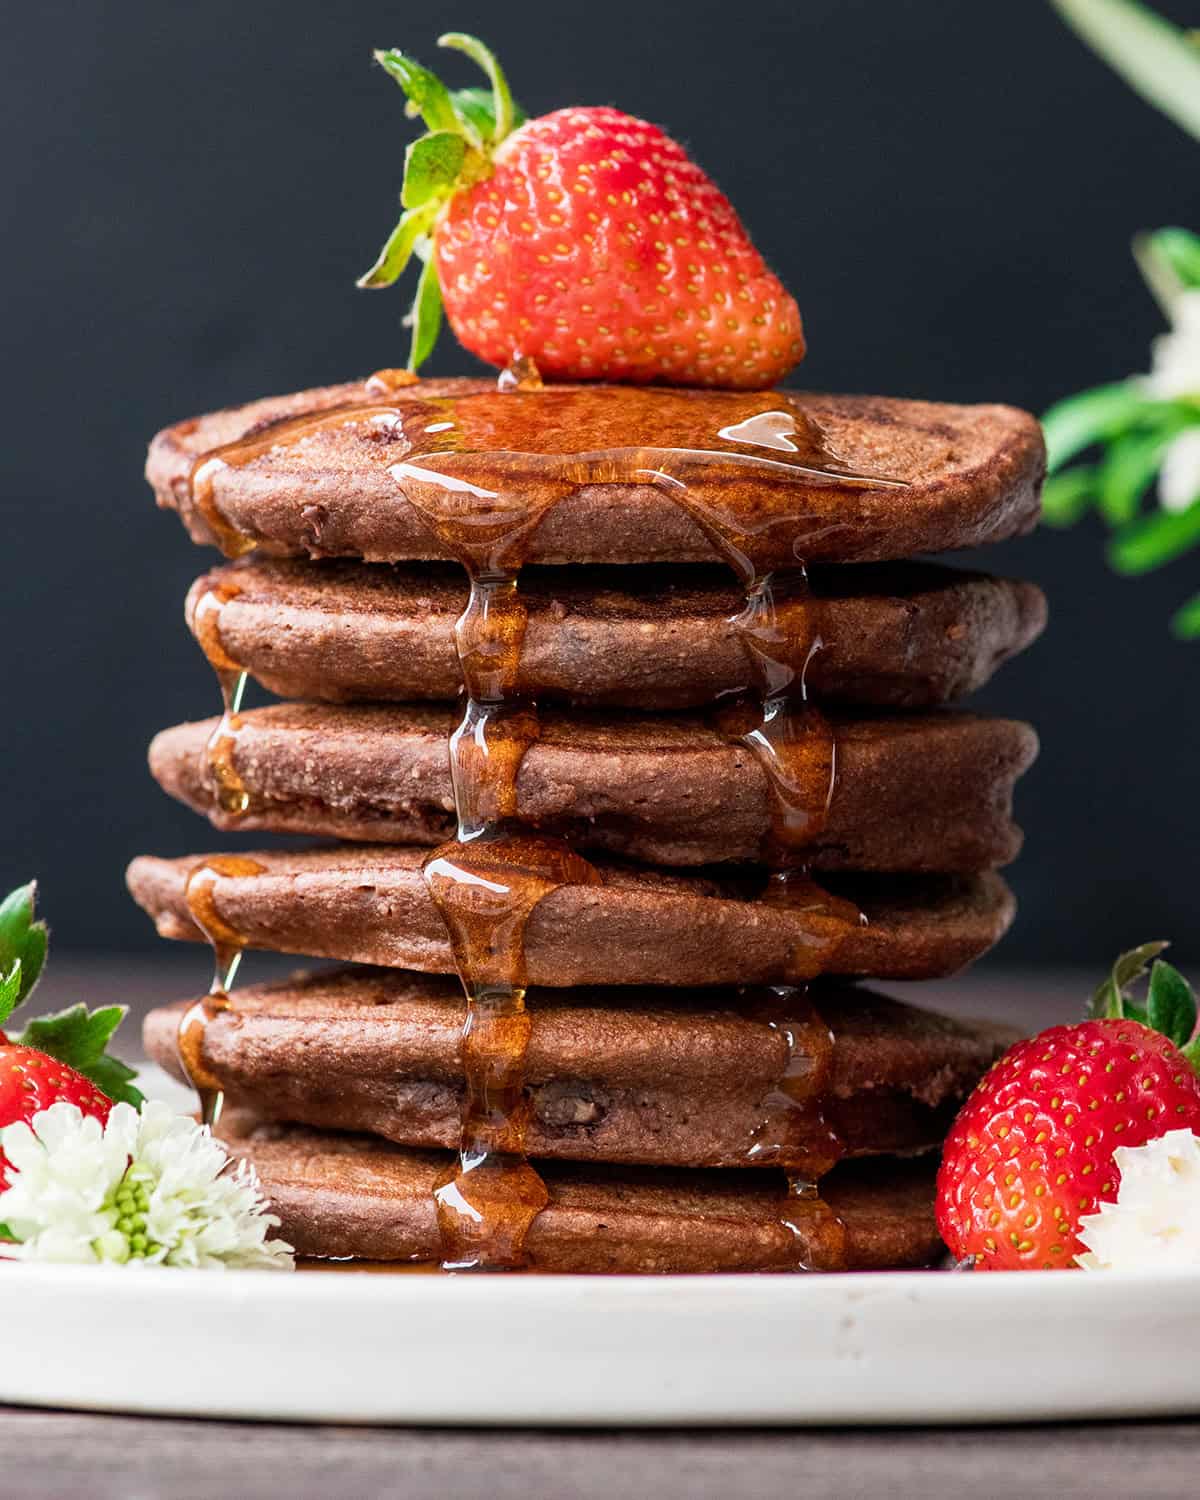 front view of a stack of 6 Healthy Chocolate Pancakes with syrup and strawberries